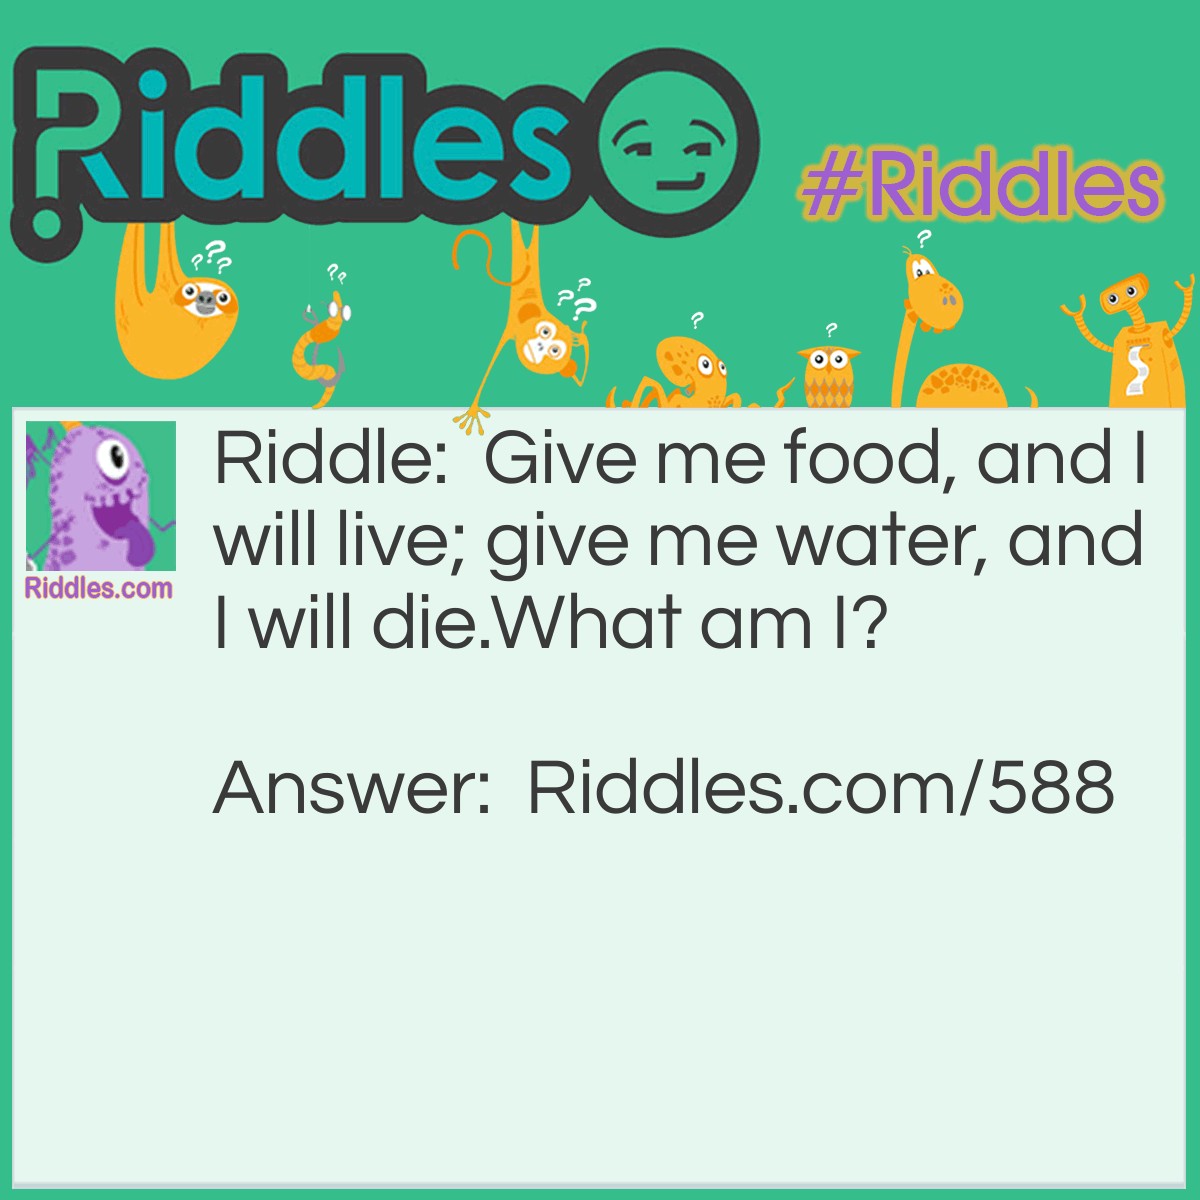 Riddle: Give me food, and I will live; give me water, and I will die.
What am I? Answer: Fire!